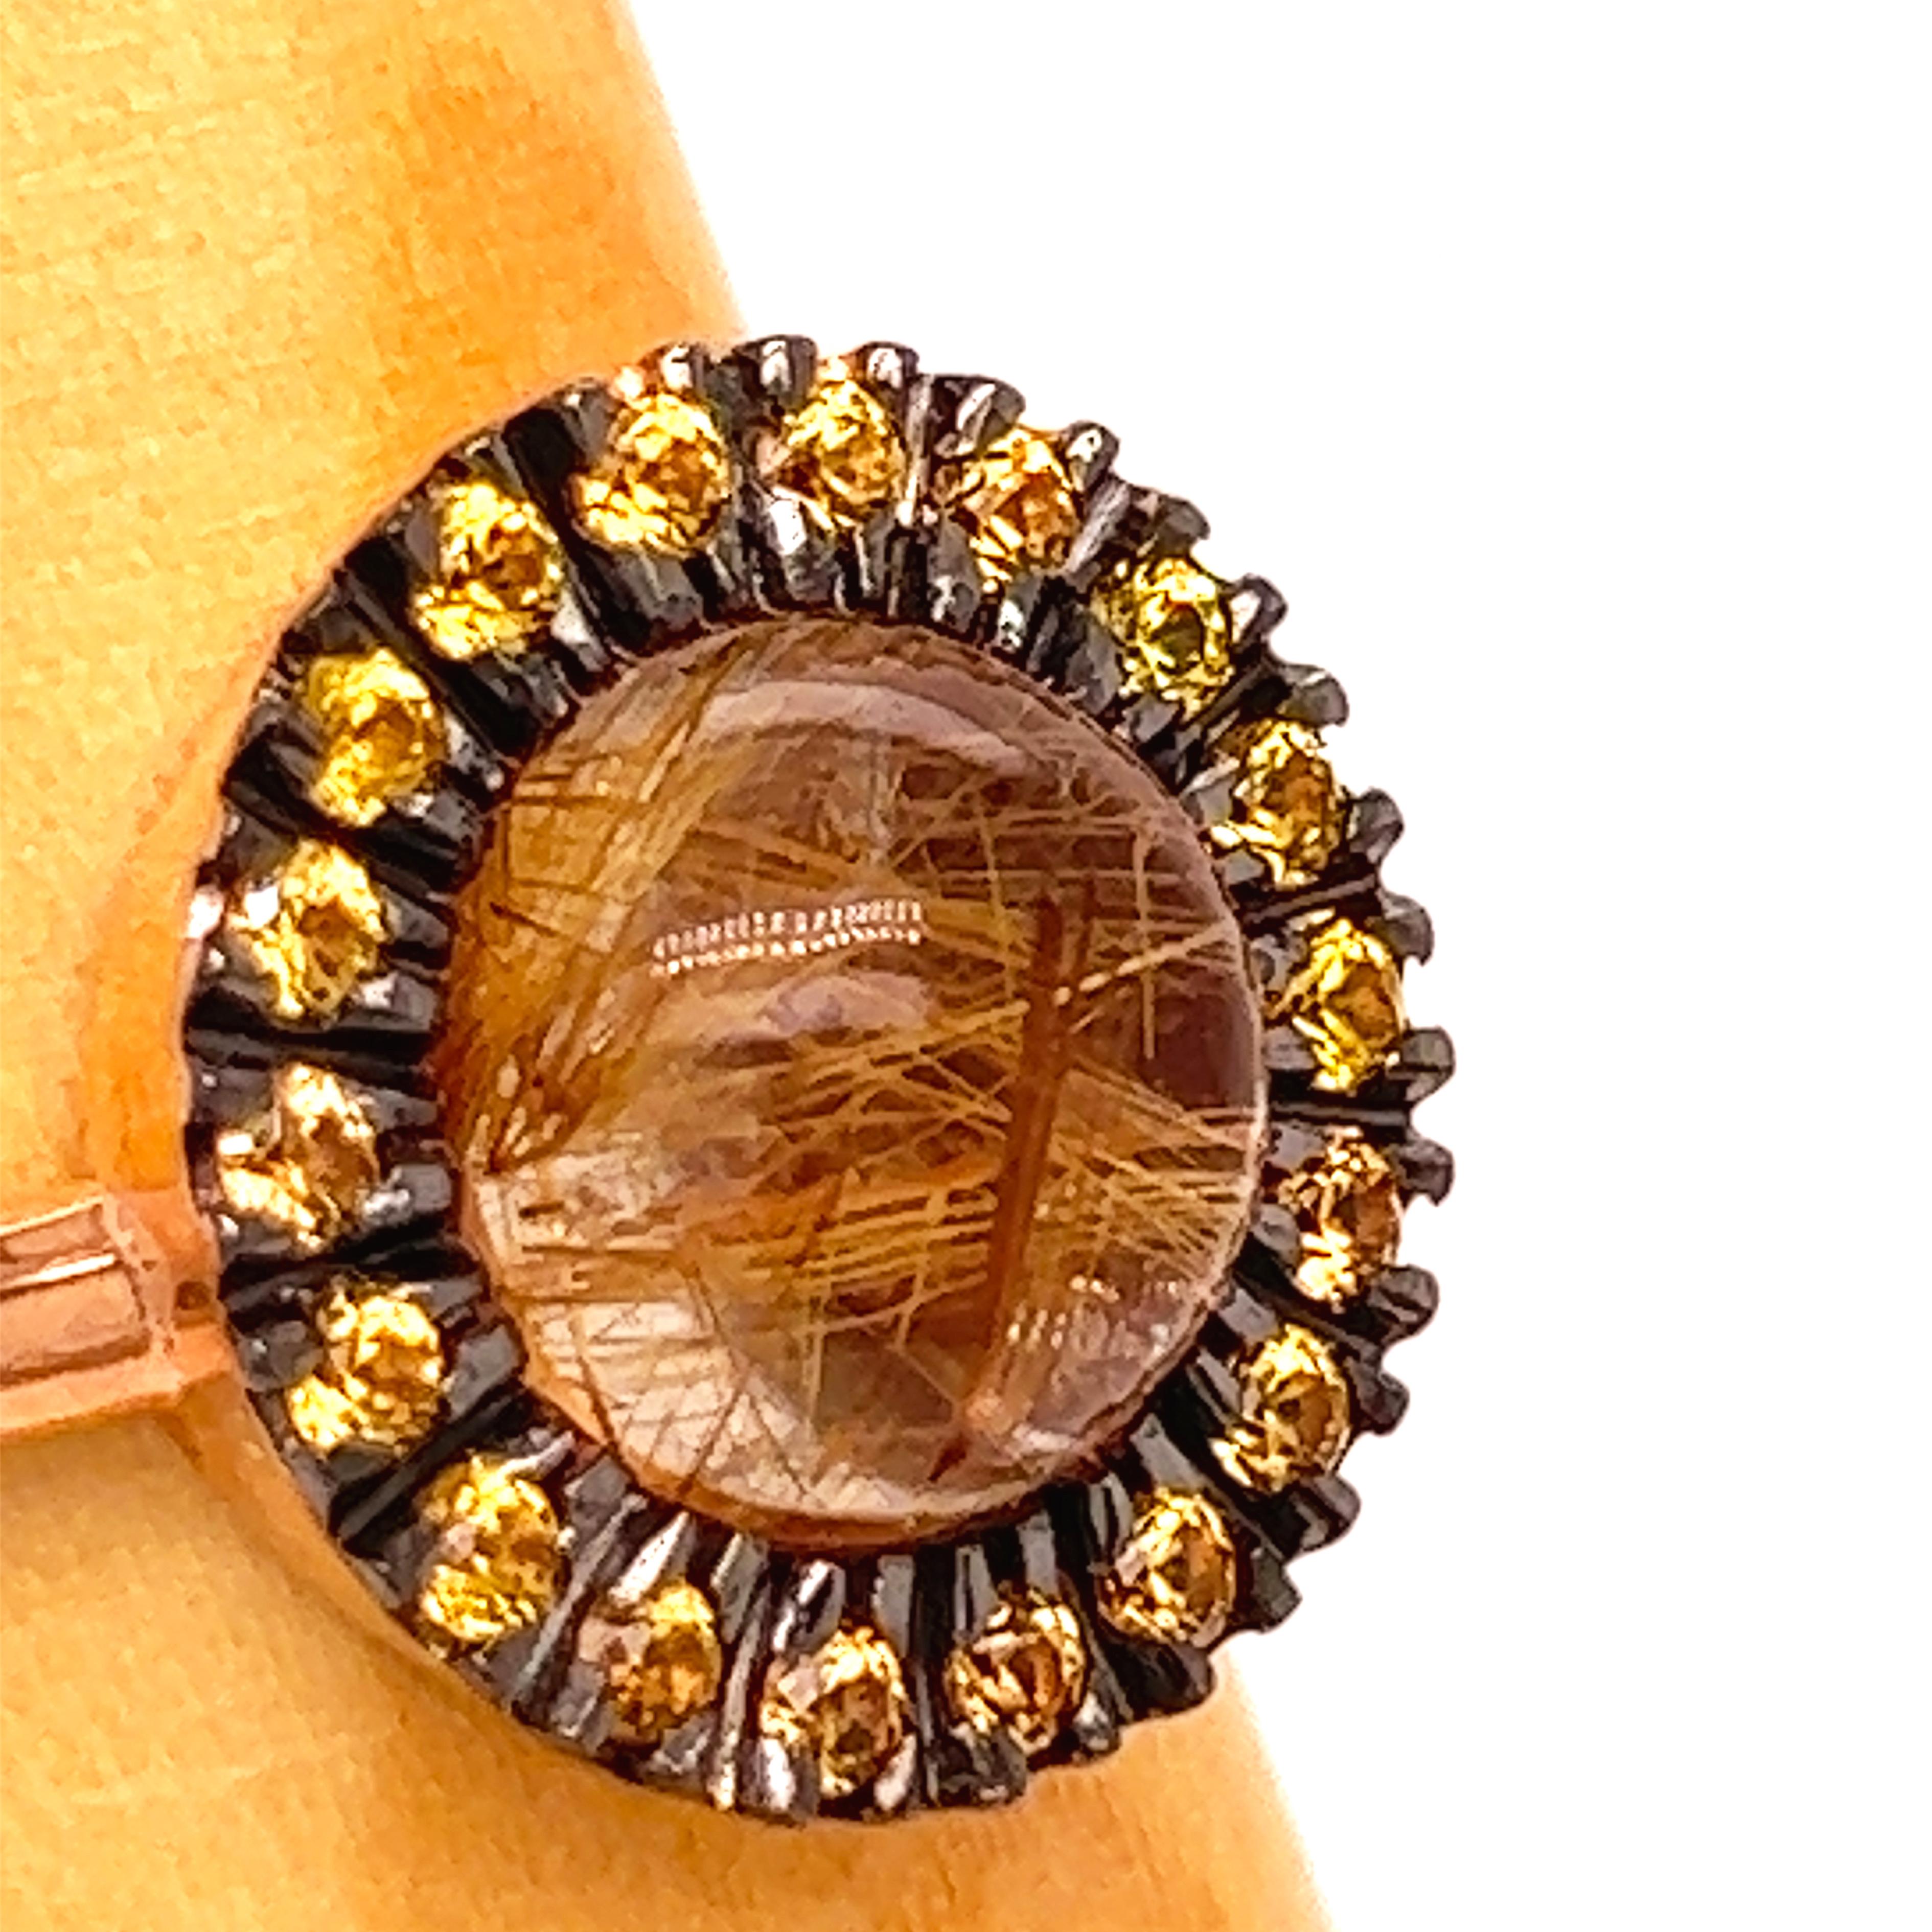 Chic, Unique yet Timeless Contemporary Cocktail Ring featuring a Natural 4.20Kt Rutilated Quartz Round Cabochon surrounded by 0.93Kt Natural Vivid Yellow Sapphire Diamond Cut in an elegant Rose and Black Oxidized Gold Setting: a Stunning, Magical